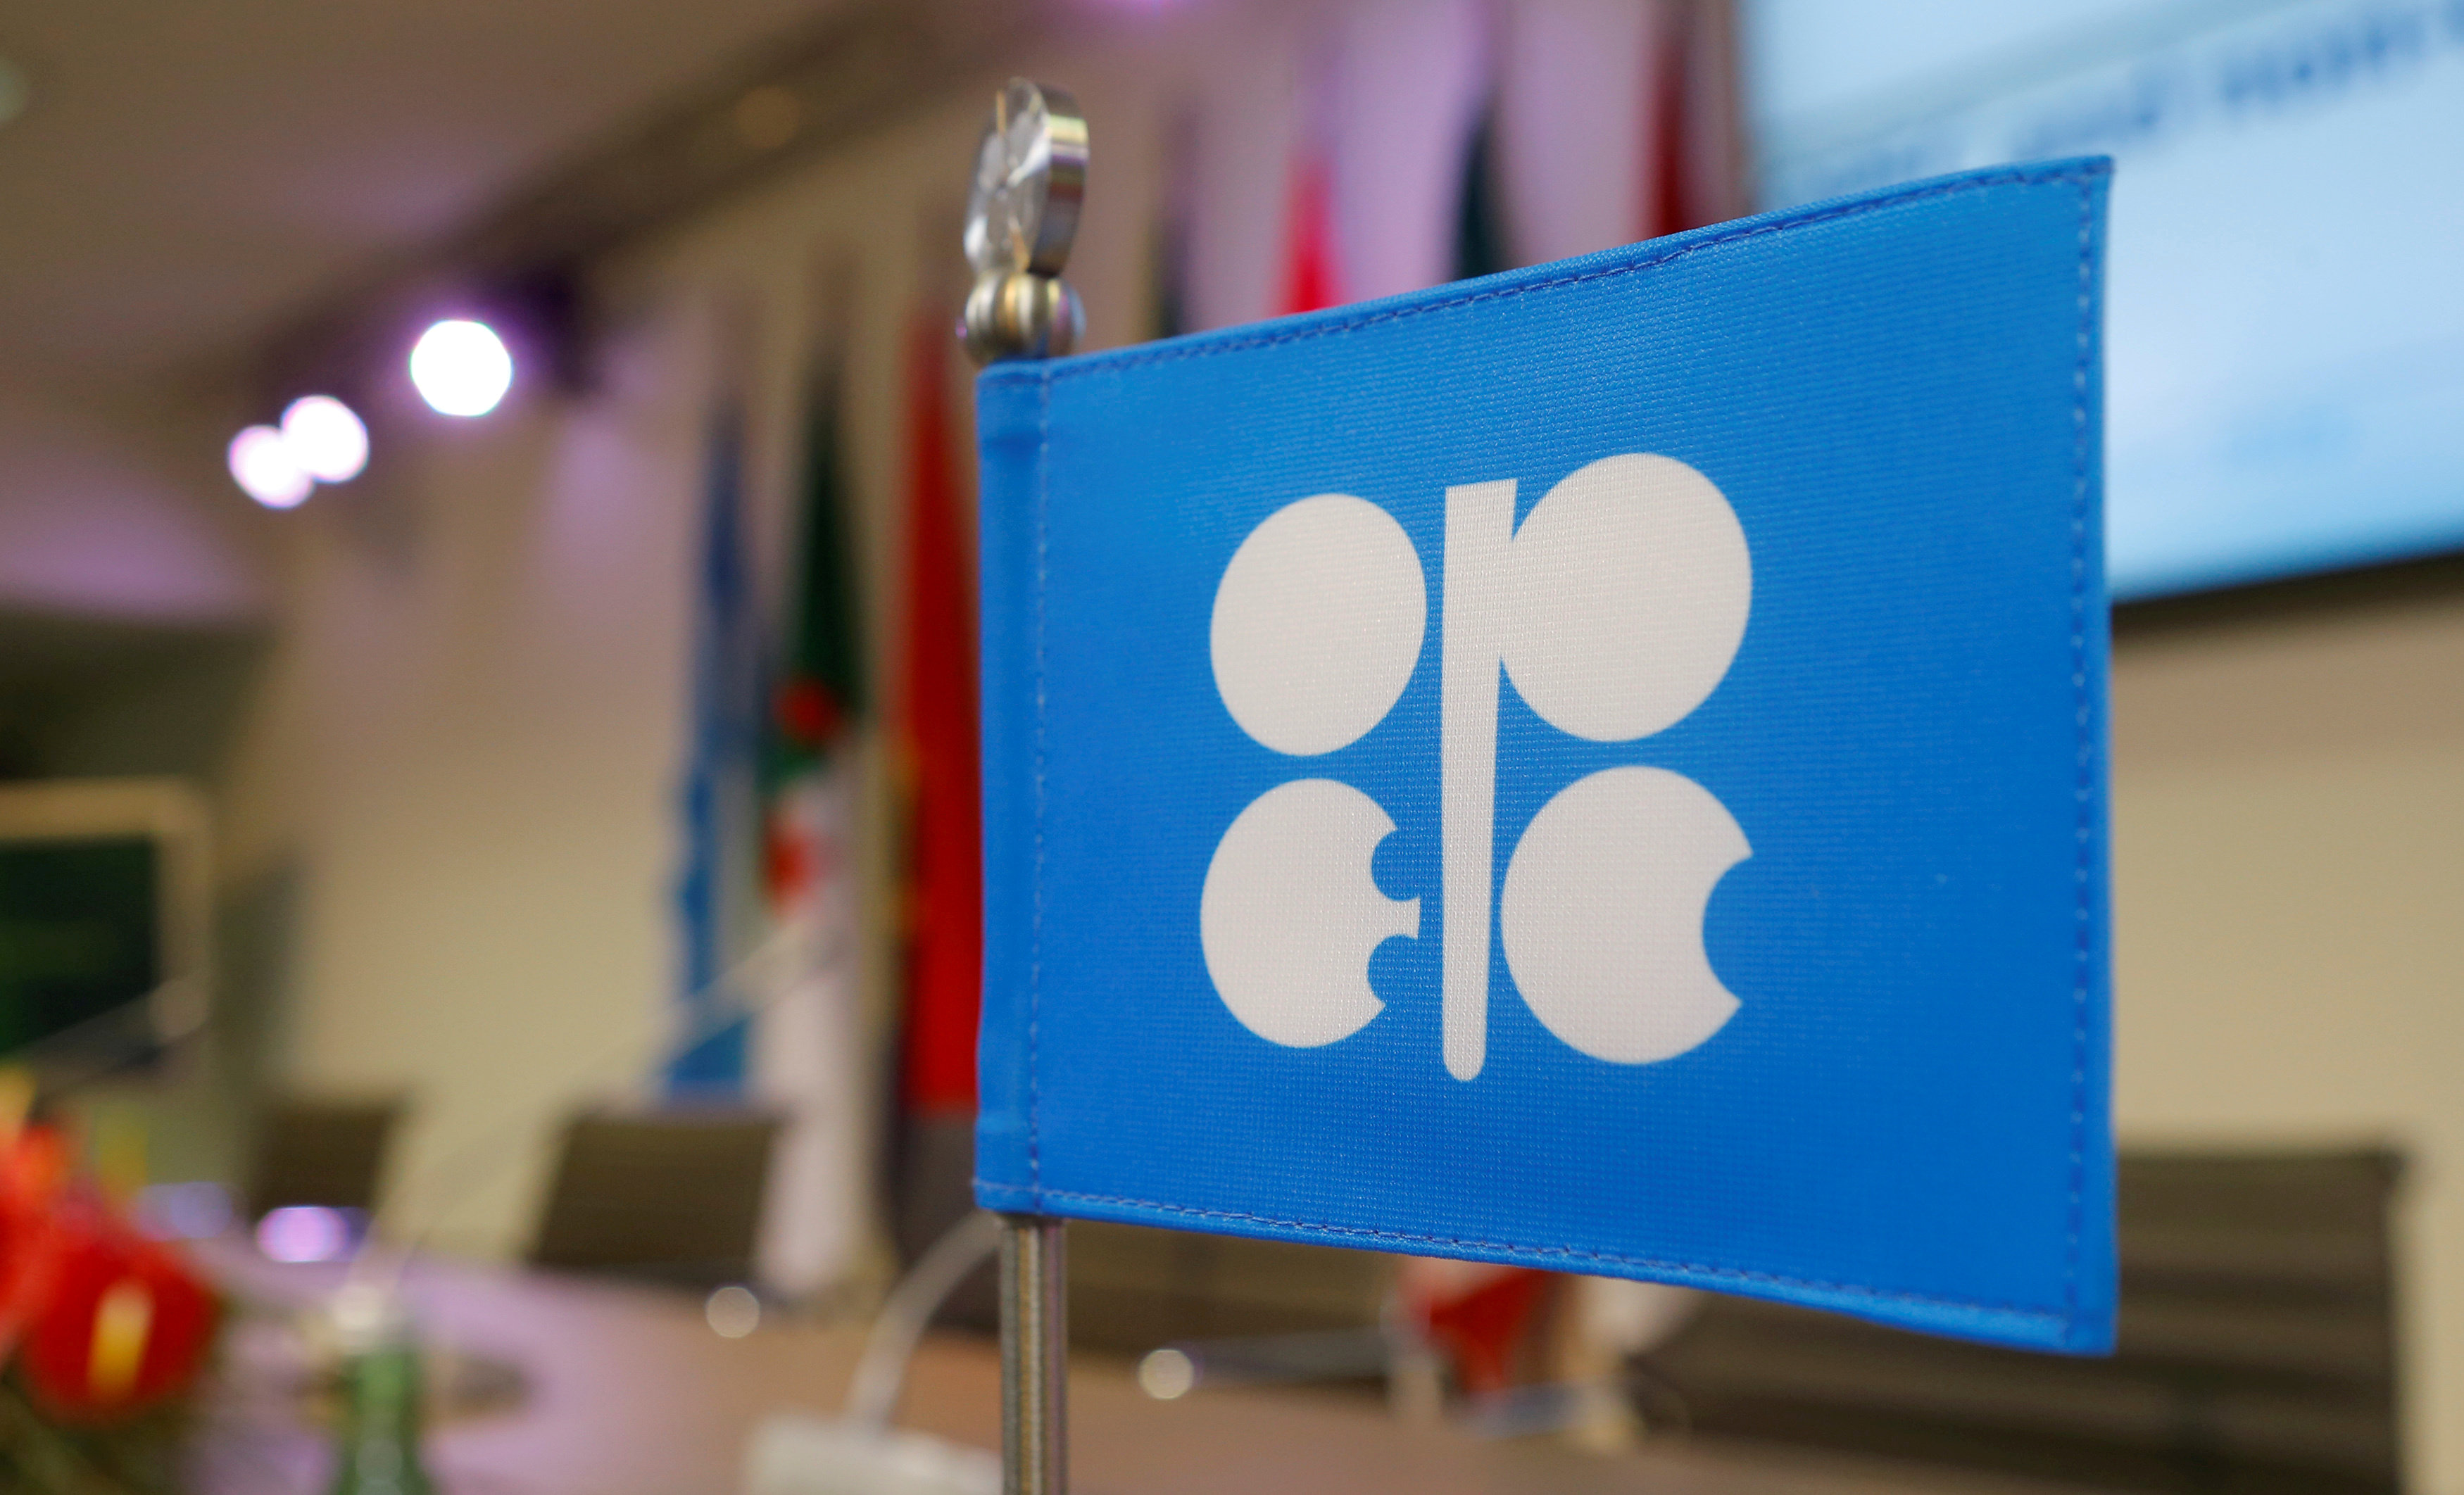 Opec sees strong oil market, possible need for more output